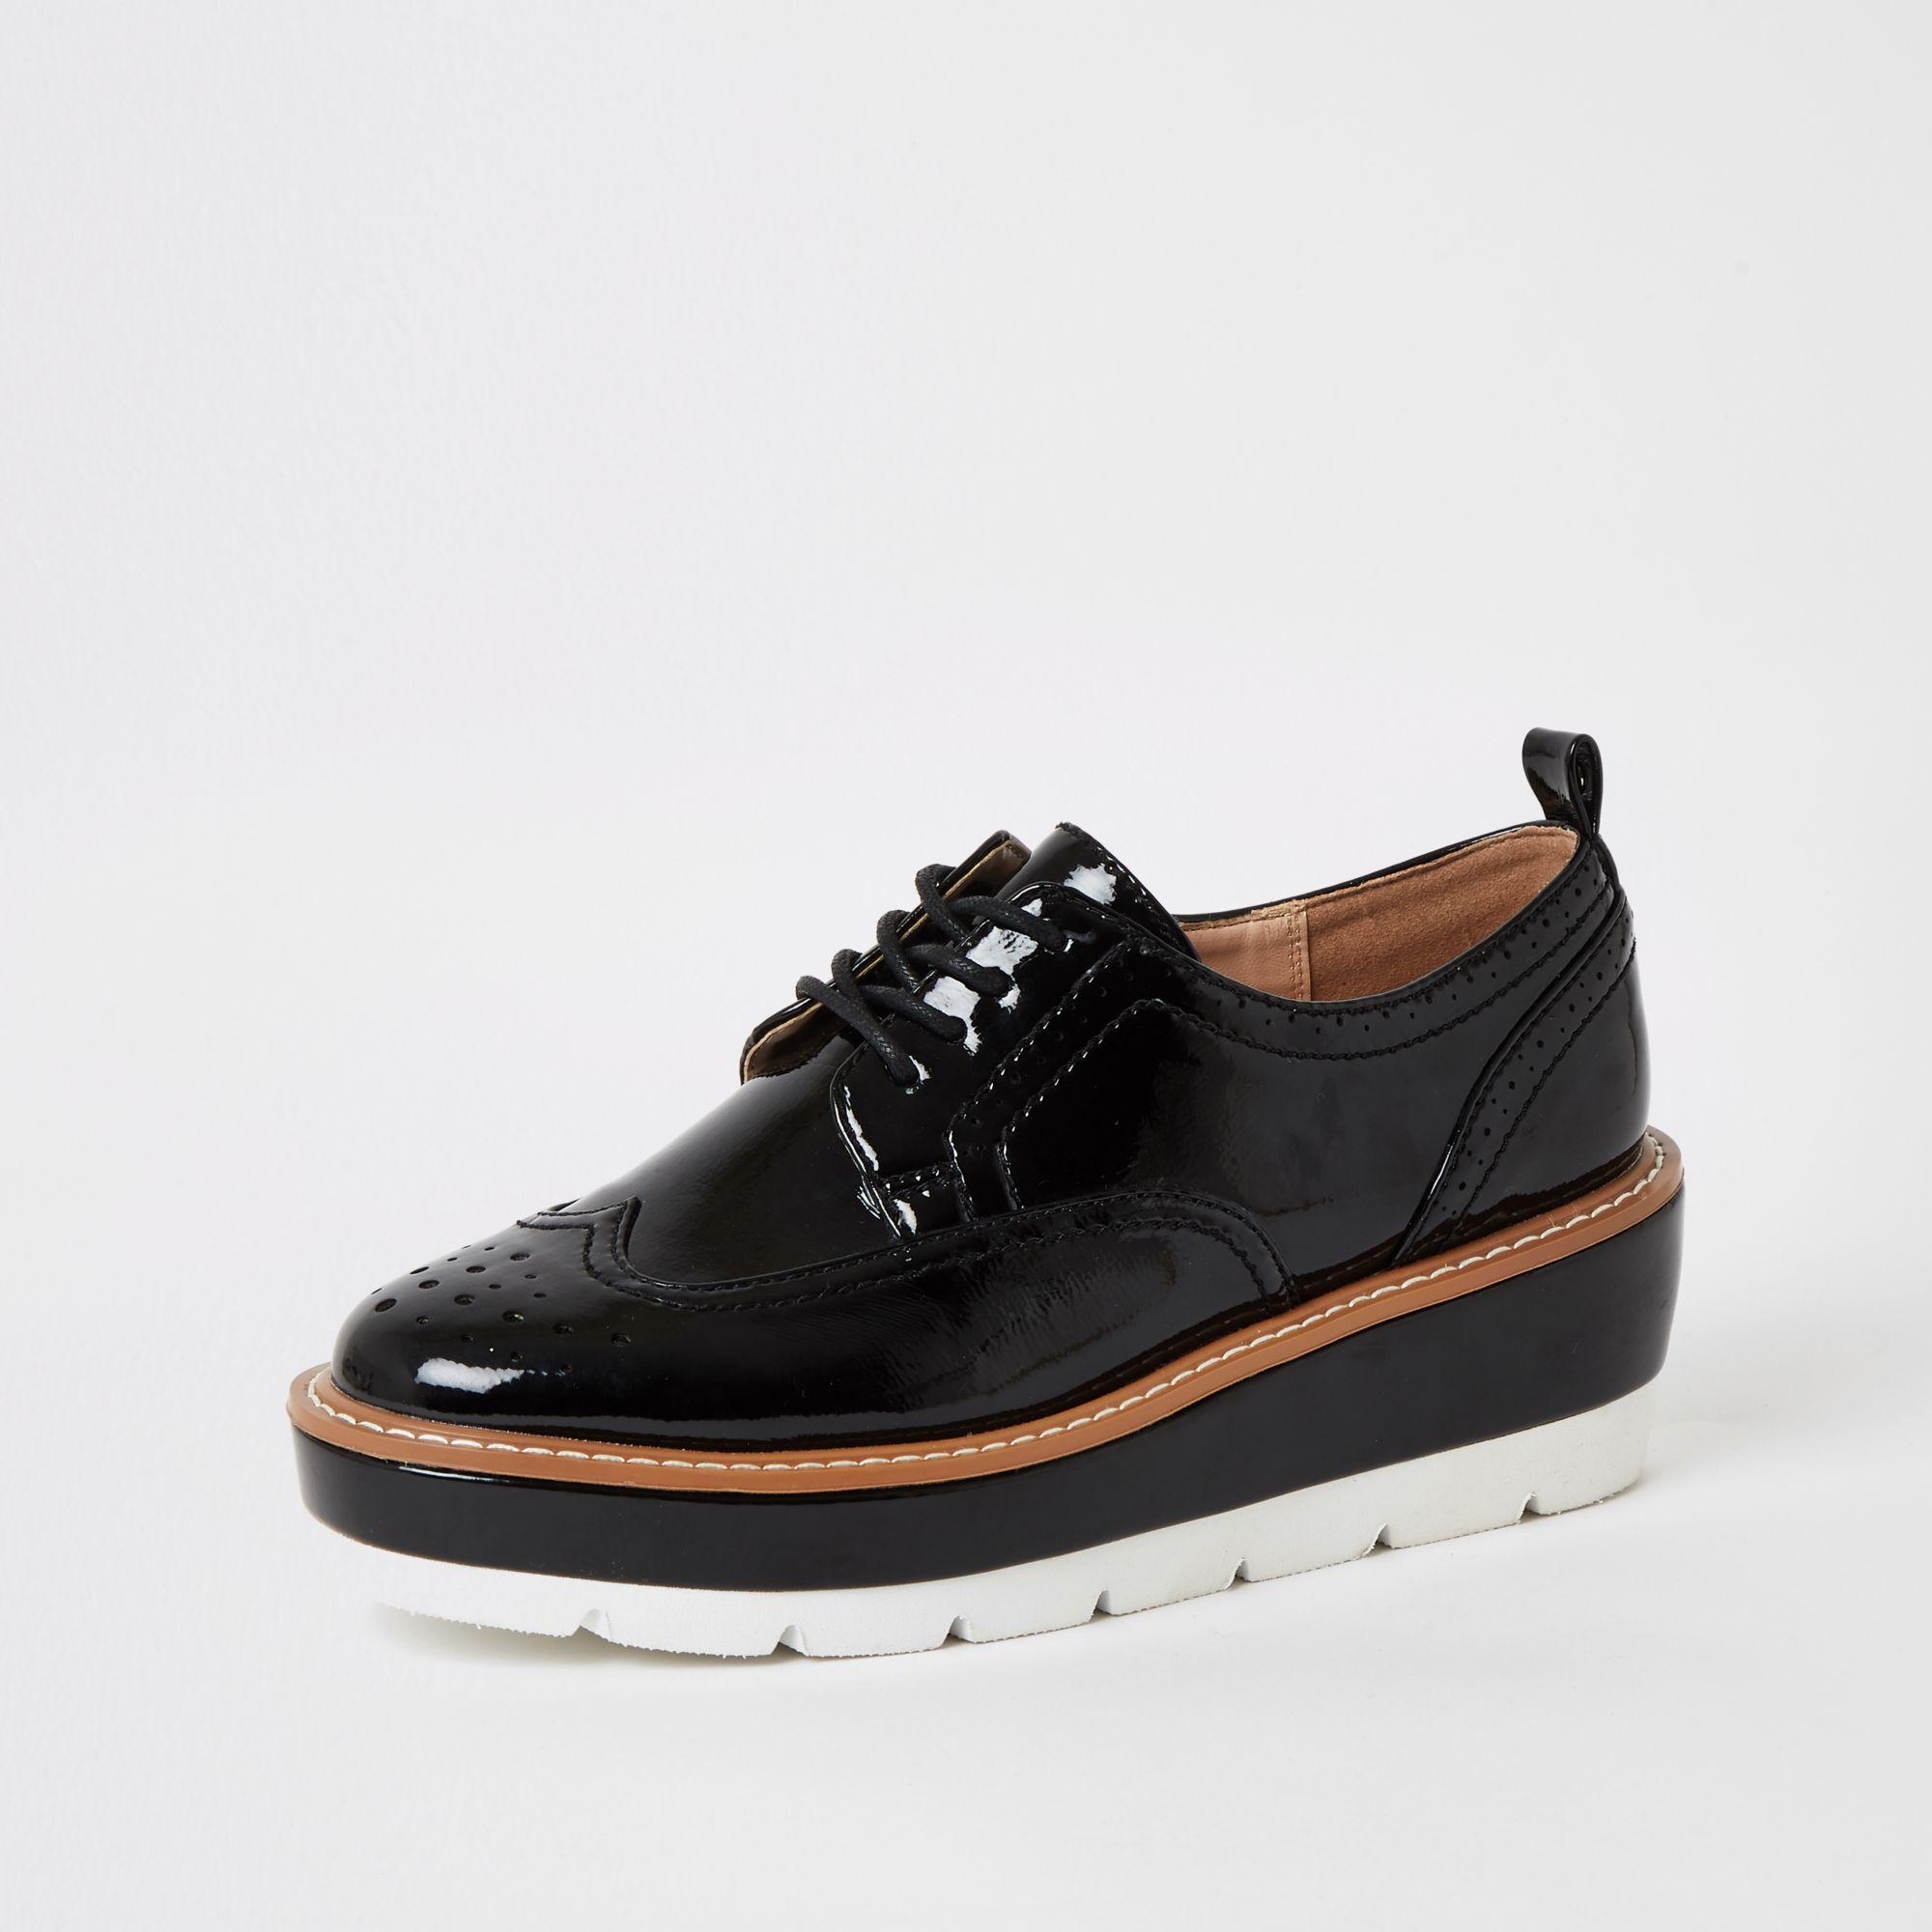 River Island Patent Lace-up Platform Brogues in Black - Lyst